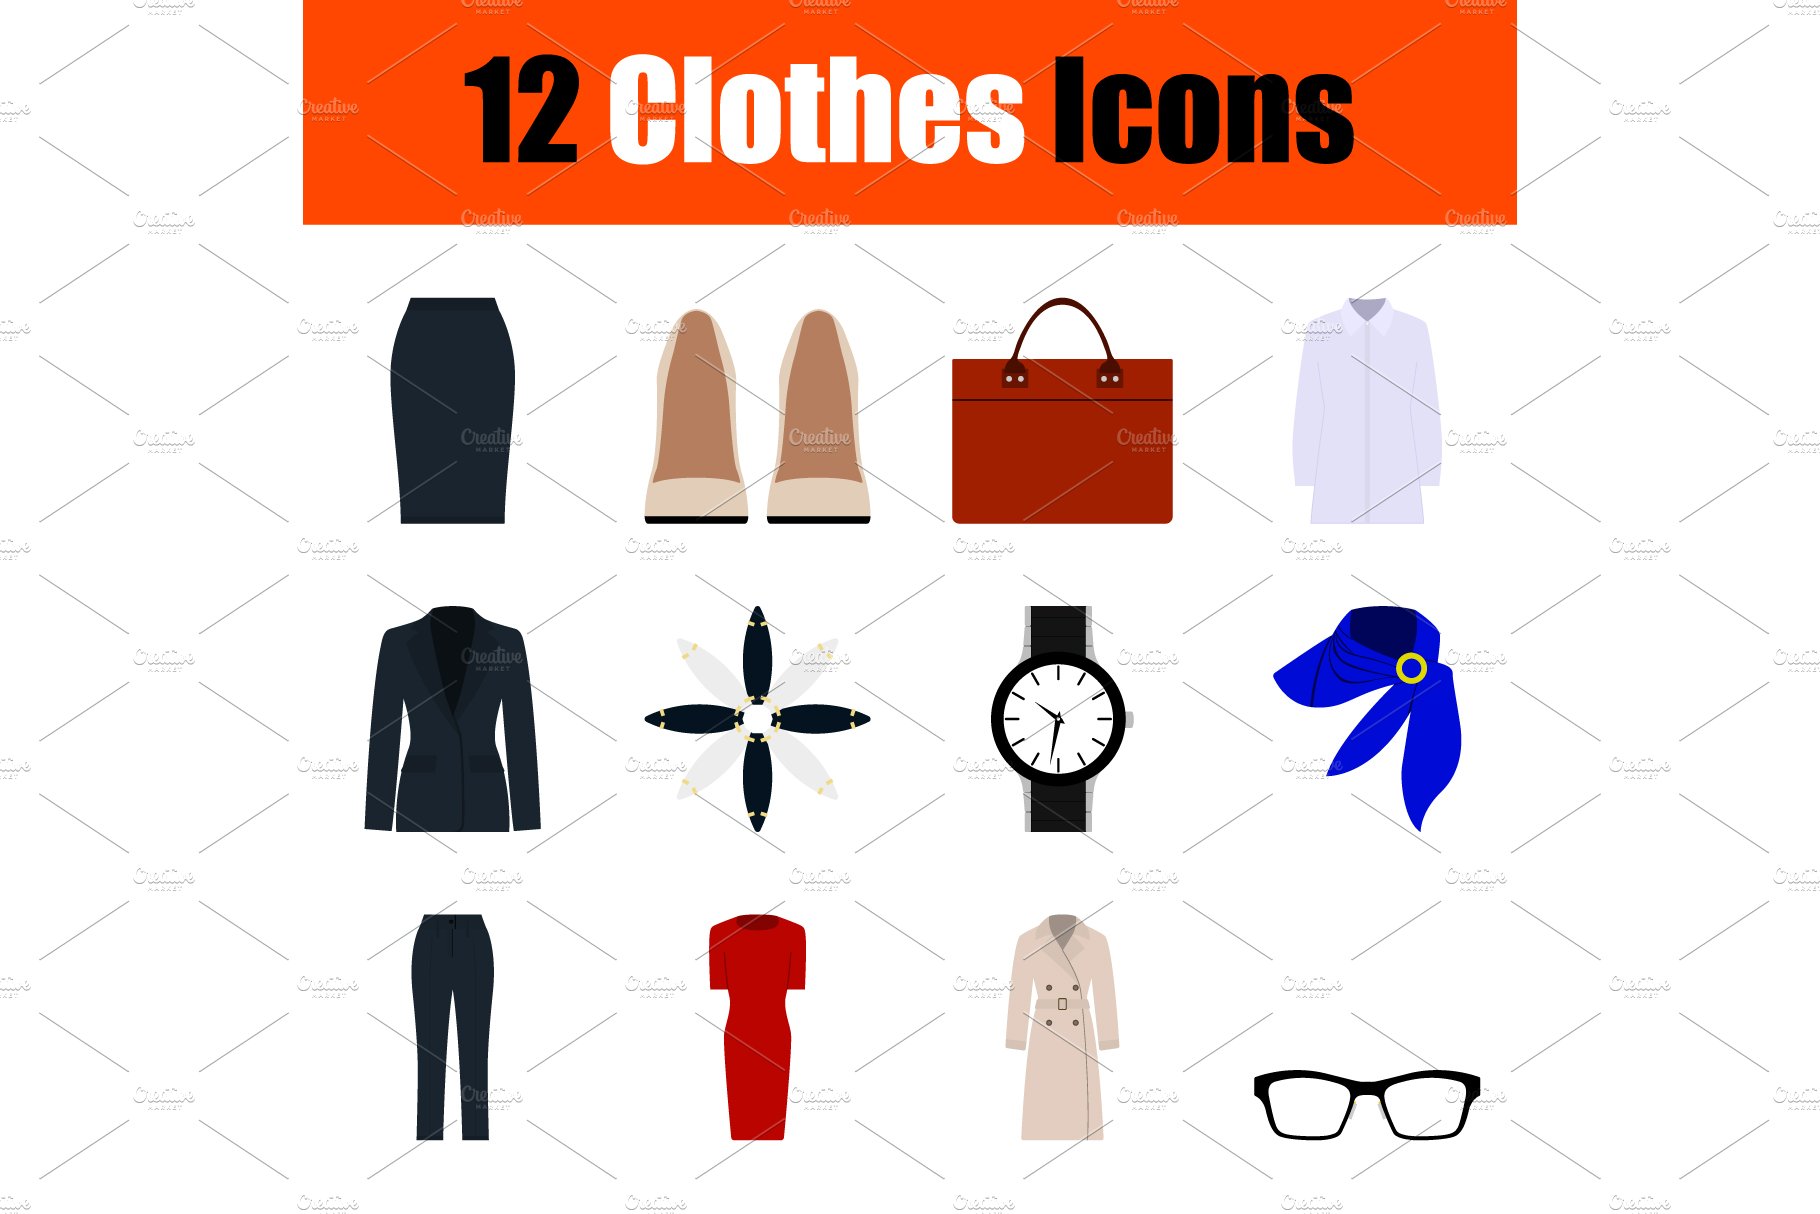 Clothes Icon Set cover image.